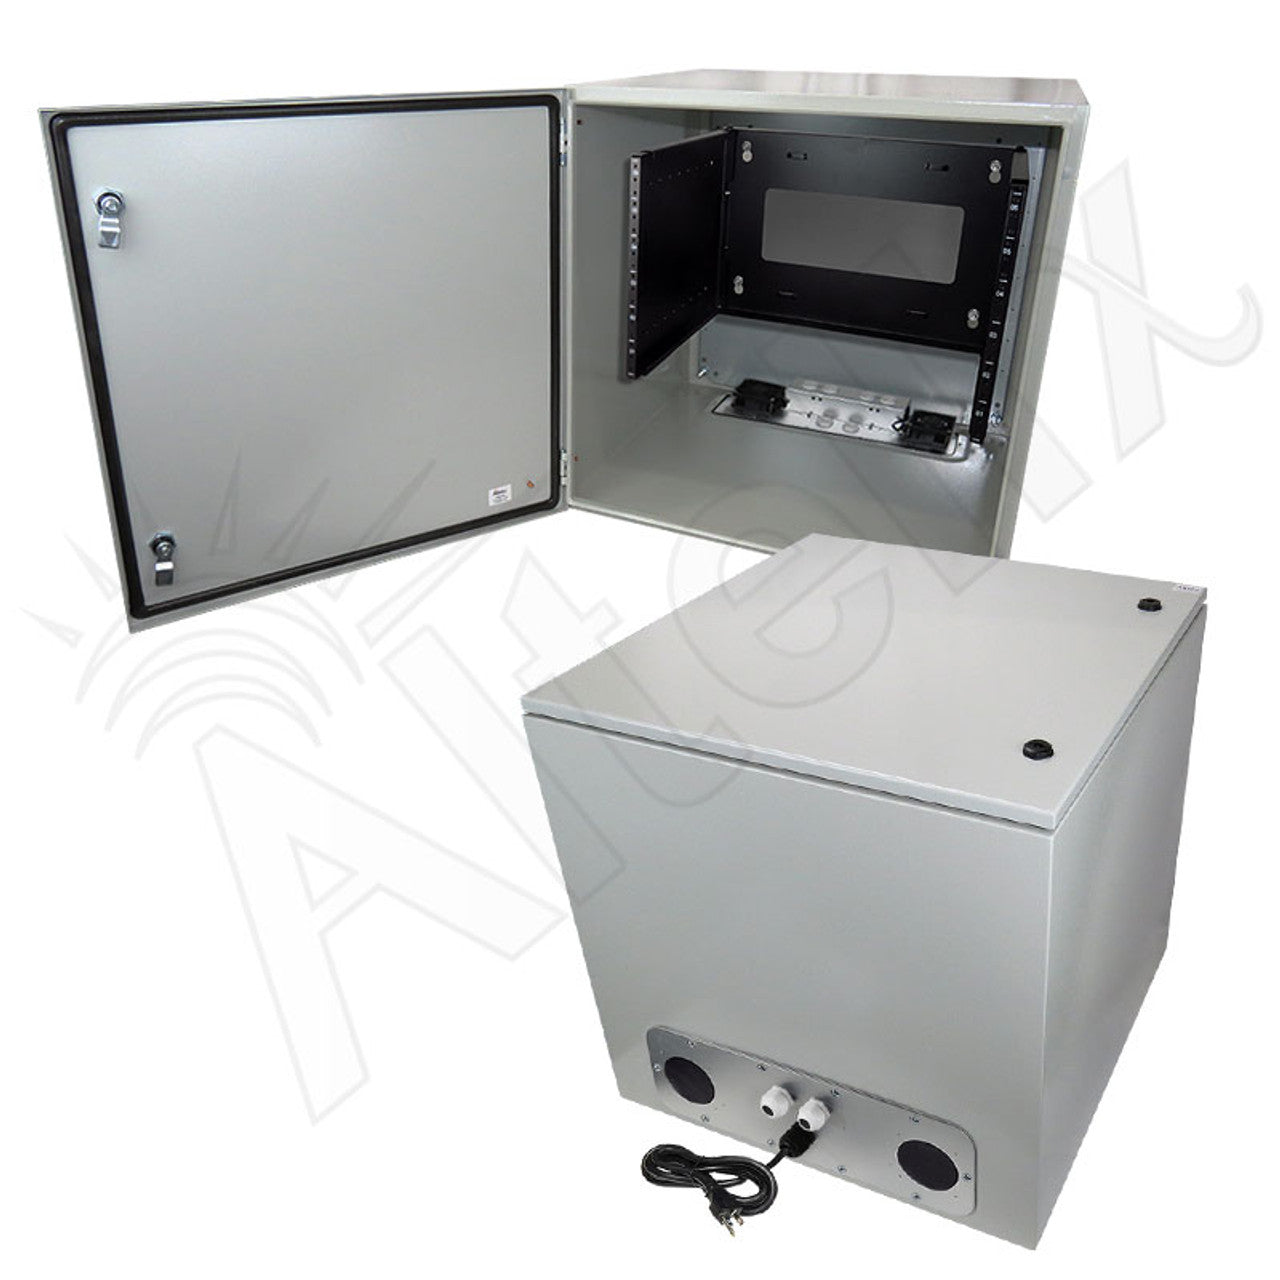 Altelix 120VAC 20A Steel NEMA Enclosure for UPS Power Systems with 19" Wide 6U Rack, Dual Cooling Fans, 20A Power Outlets & Power Cord-4